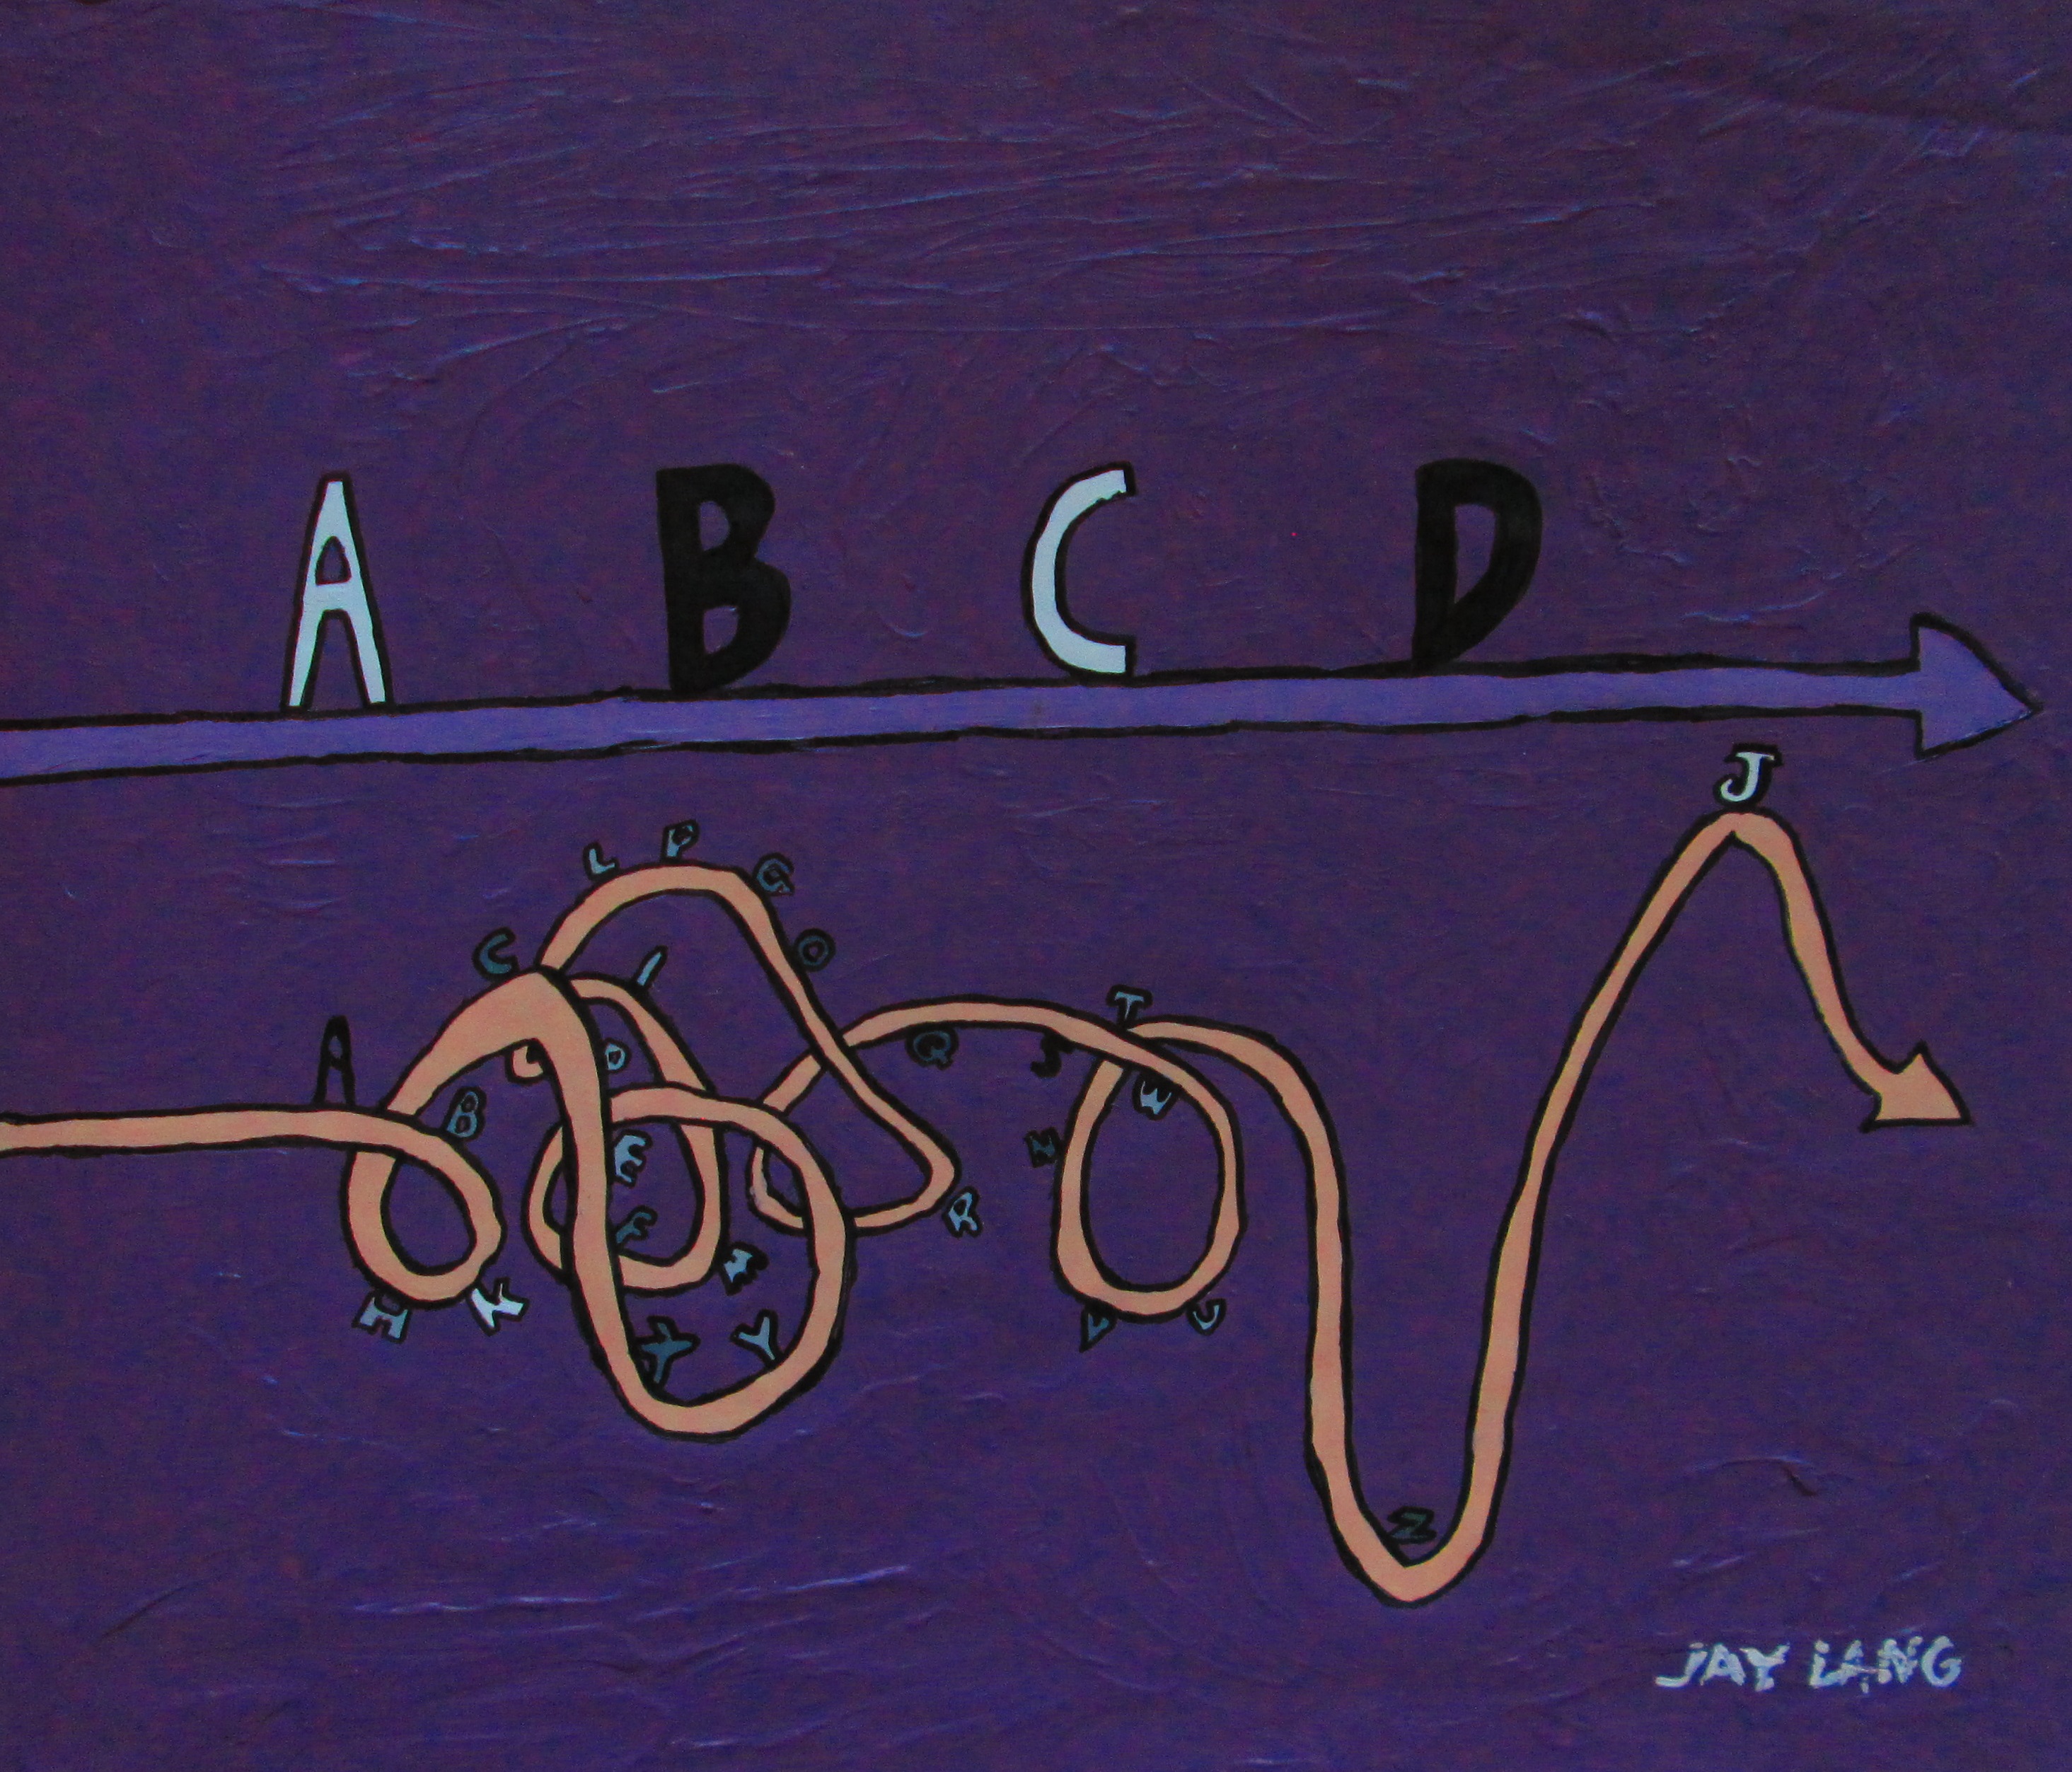 Order and Chaos is an acrylic painted piece depicting two lives. The straight one is calm, and the other is chaotic. The makeup of the lives is represented by the English alphabet moving along each one.